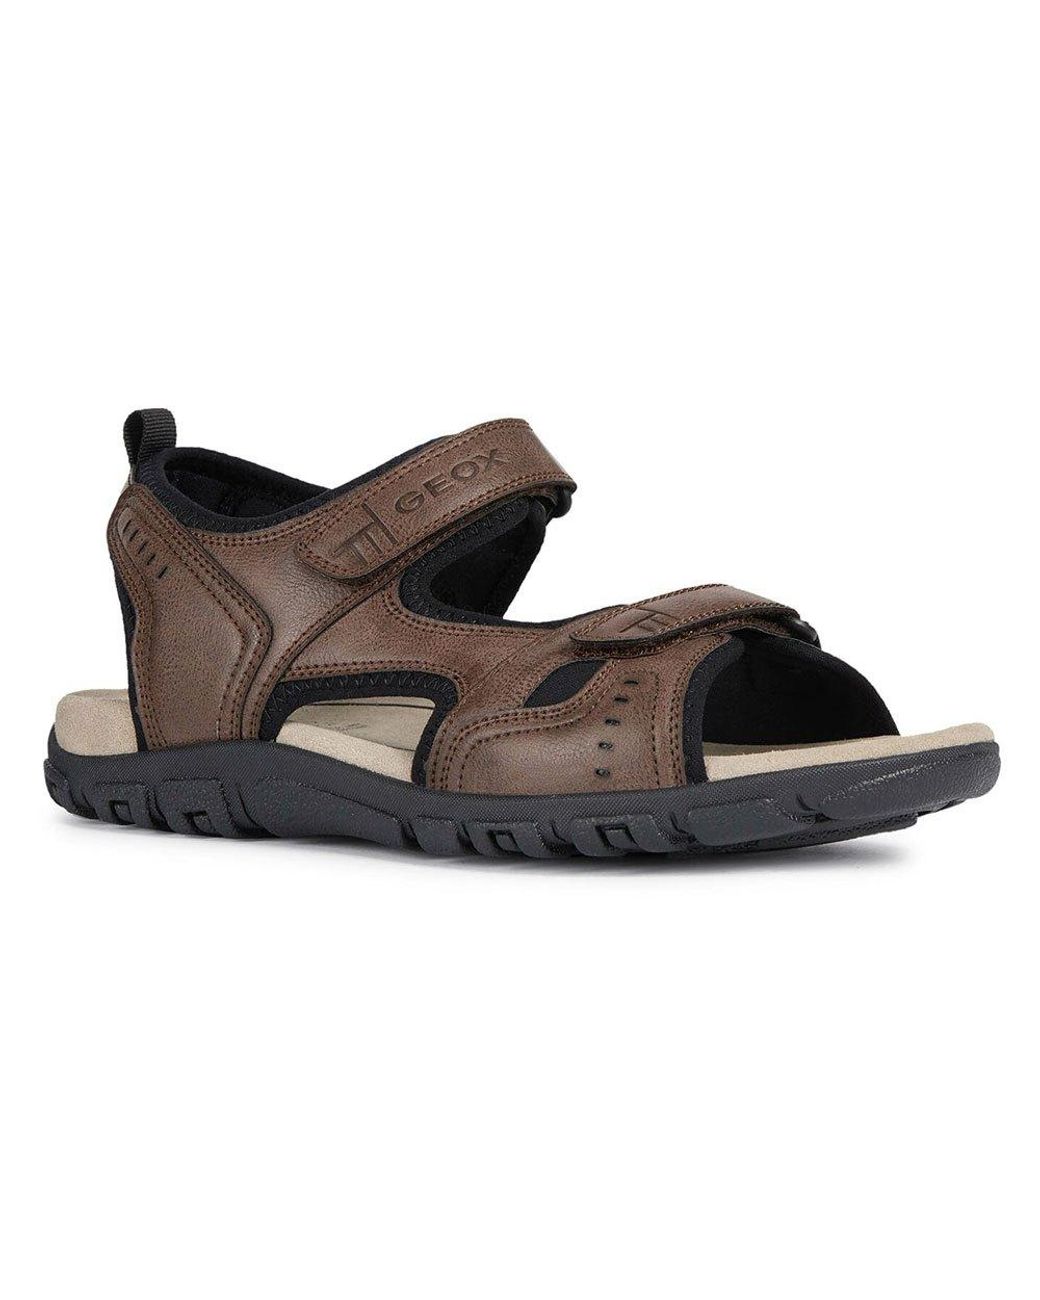 Geox Uomo Strada Sandals in Brown for Men | Lyst